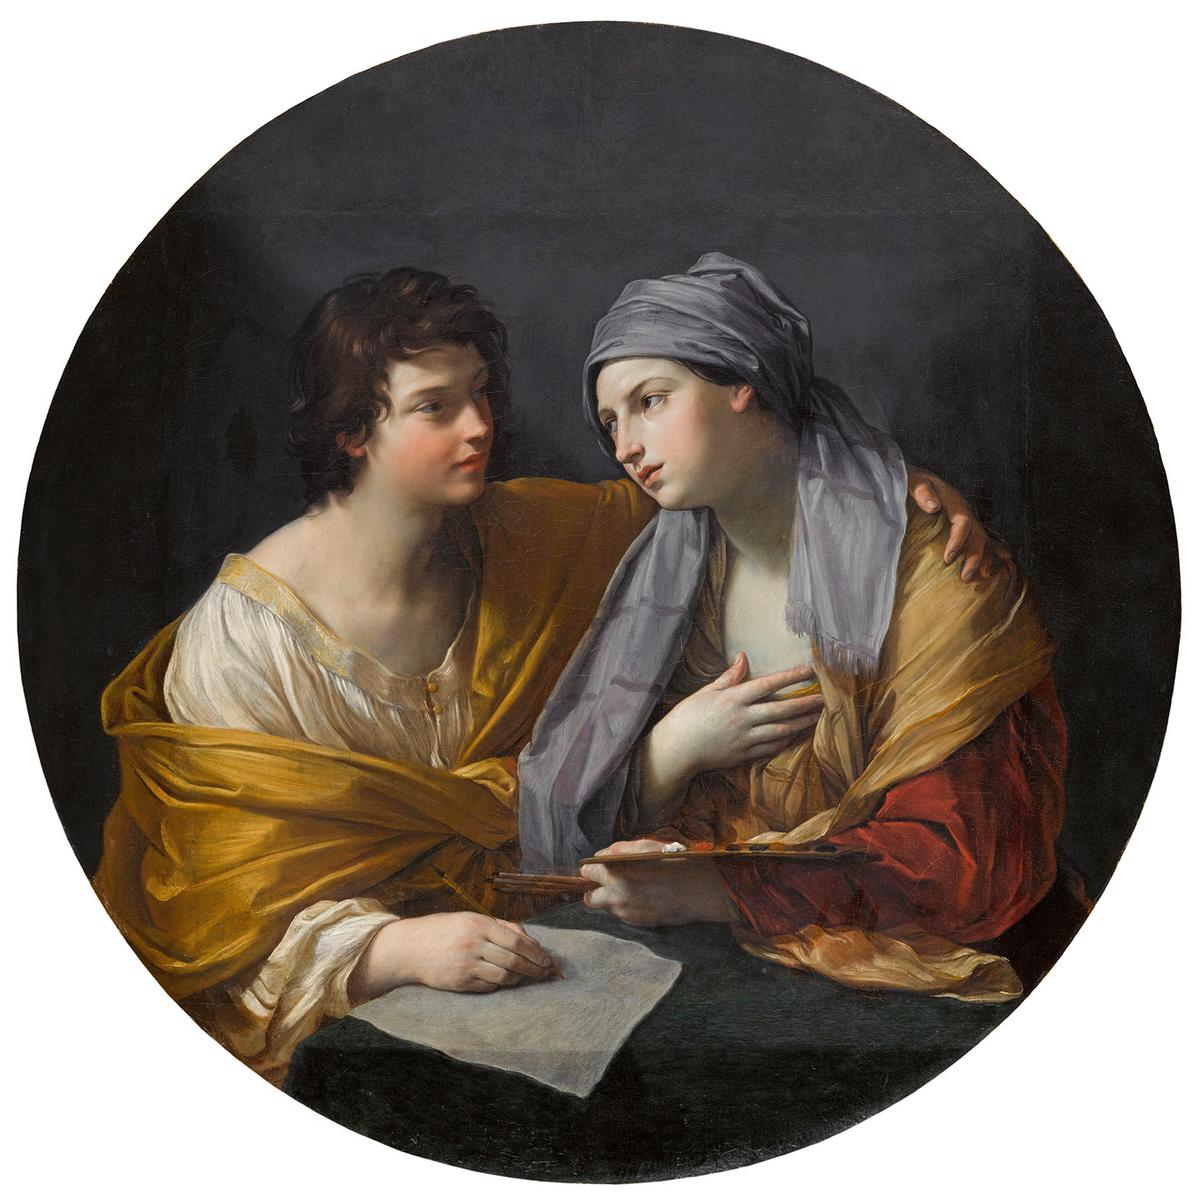 "The Union of Drawing and Color," circa 1624–1625, by Guido Reni. Oil on canvas; 47.4 inches by 47.4 inches. Louvre Museum, Paris. (Courtesy of the Prado Museum)